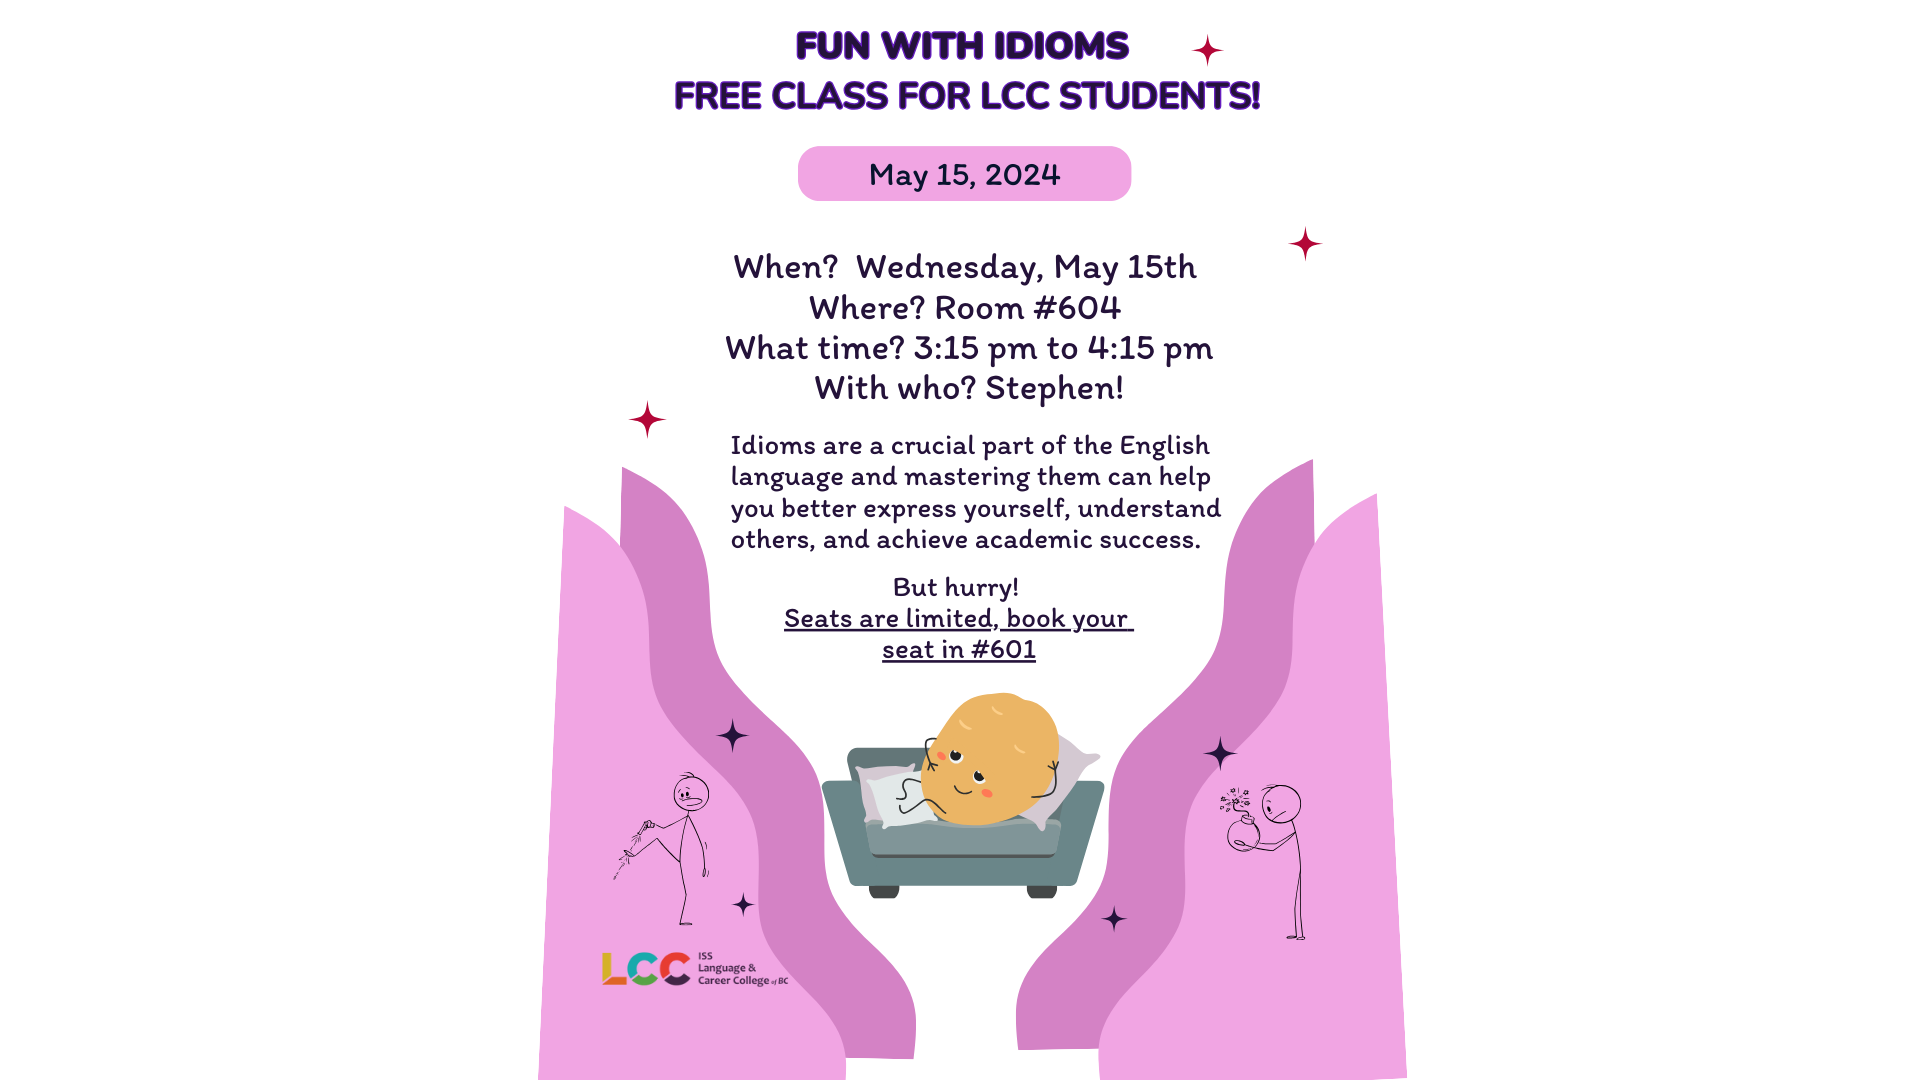 Fun with Idioms. Free English class for LCC students